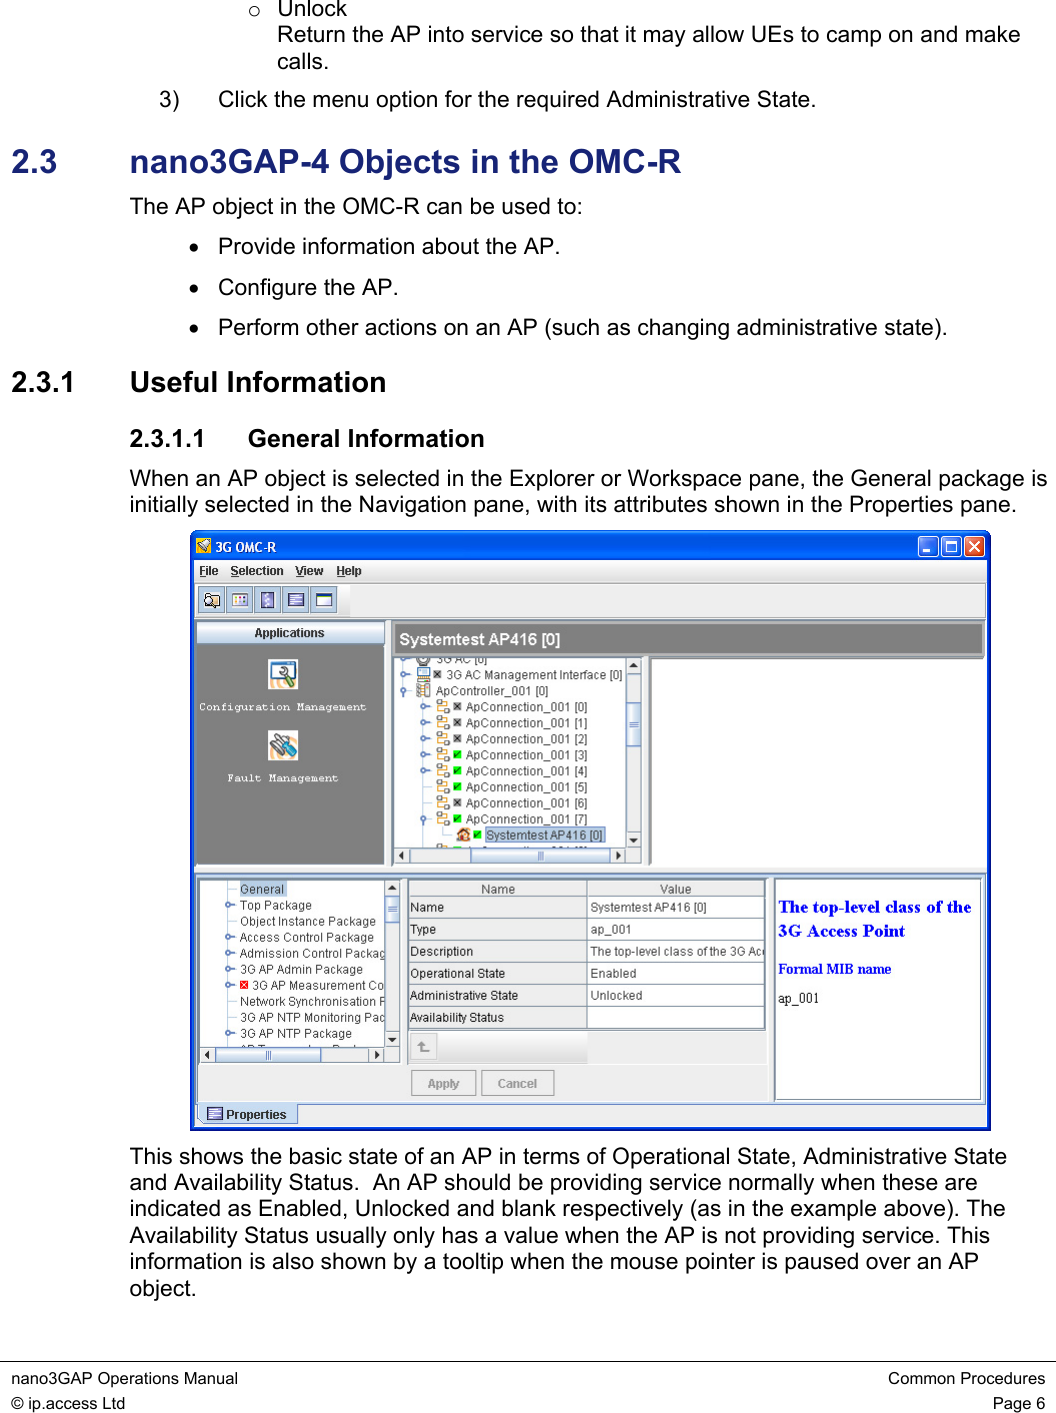 nano3GAP Operations Manual  Common Procedures © ip.access Ltd  Page 6  o Unlock Return the AP into service so that it may allow UEs to camp on and make calls. 3)  Click the menu option for the required Administrative State. 2.3  nano3GAP-4 Objects in the OMC-R The AP object in the OMC-R can be used to: •  Provide information about the AP. •  Configure the AP. •  Perform other actions on an AP (such as changing administrative state). 2.3.1  Useful Information 2.3.1.1 General Information When an AP object is selected in the Explorer or Workspace pane, the General package is initially selected in the Navigation pane, with its attributes shown in the Properties pane.  This shows the basic state of an AP in terms of Operational State, Administrative State and Availability Status.  An AP should be providing service normally when these are indicated as Enabled, Unlocked and blank respectively (as in the example above). The Availability Status usually only has a value when the AP is not providing service. This information is also shown by a tooltip when the mouse pointer is paused over an AP object. 